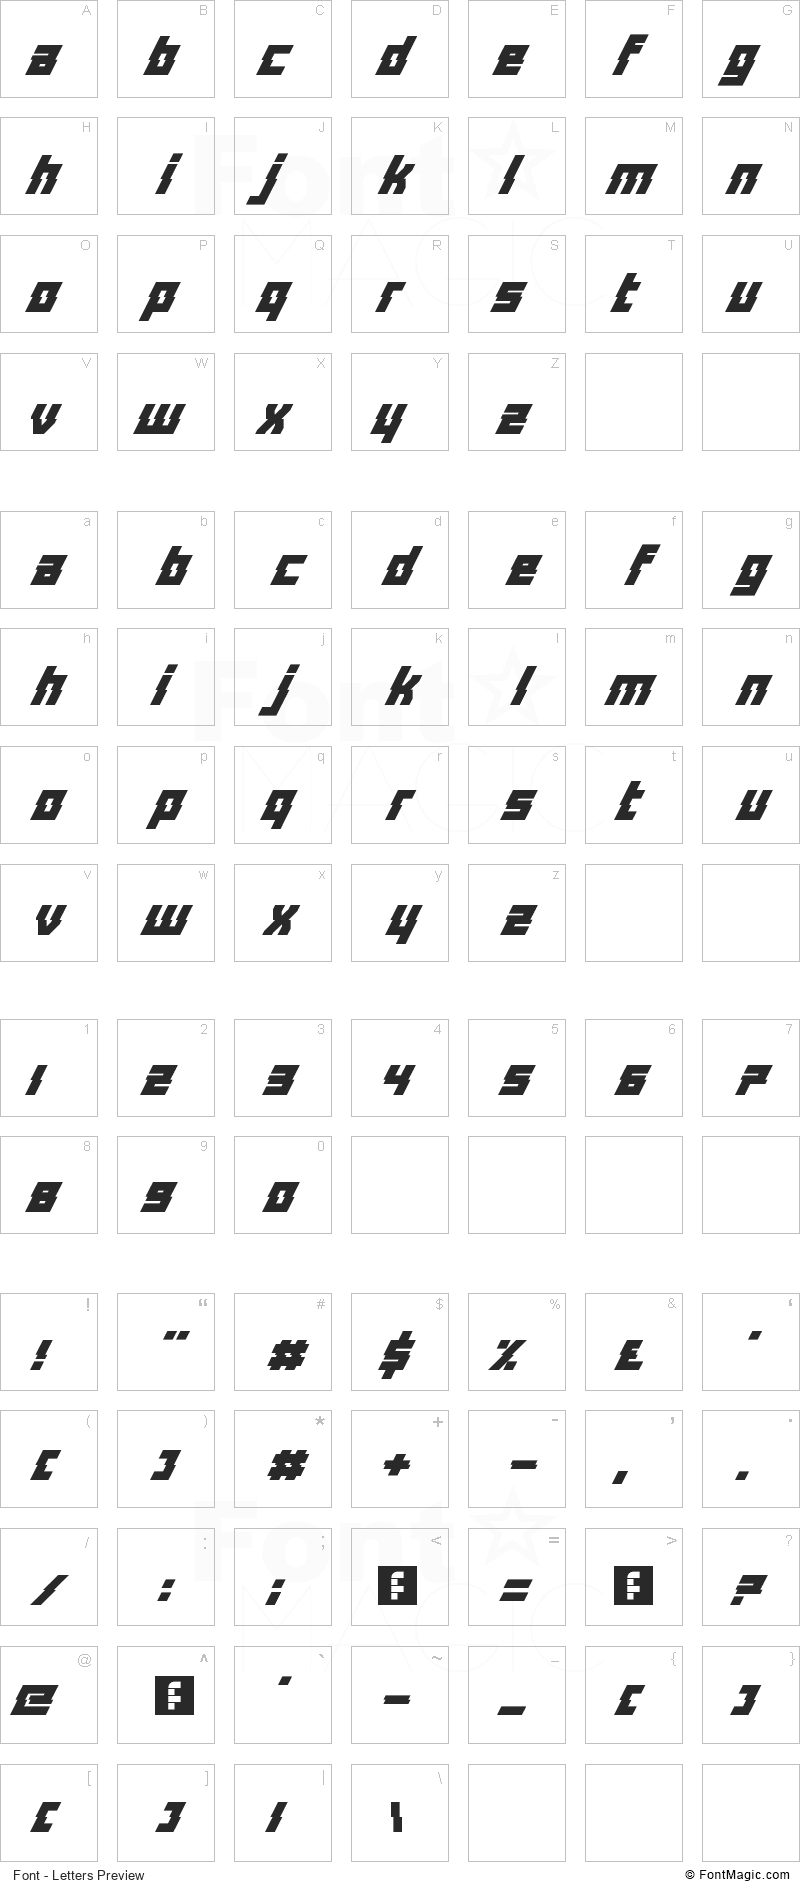 Distortion Of The Brain And Mind Font - All Latters Preview Chart